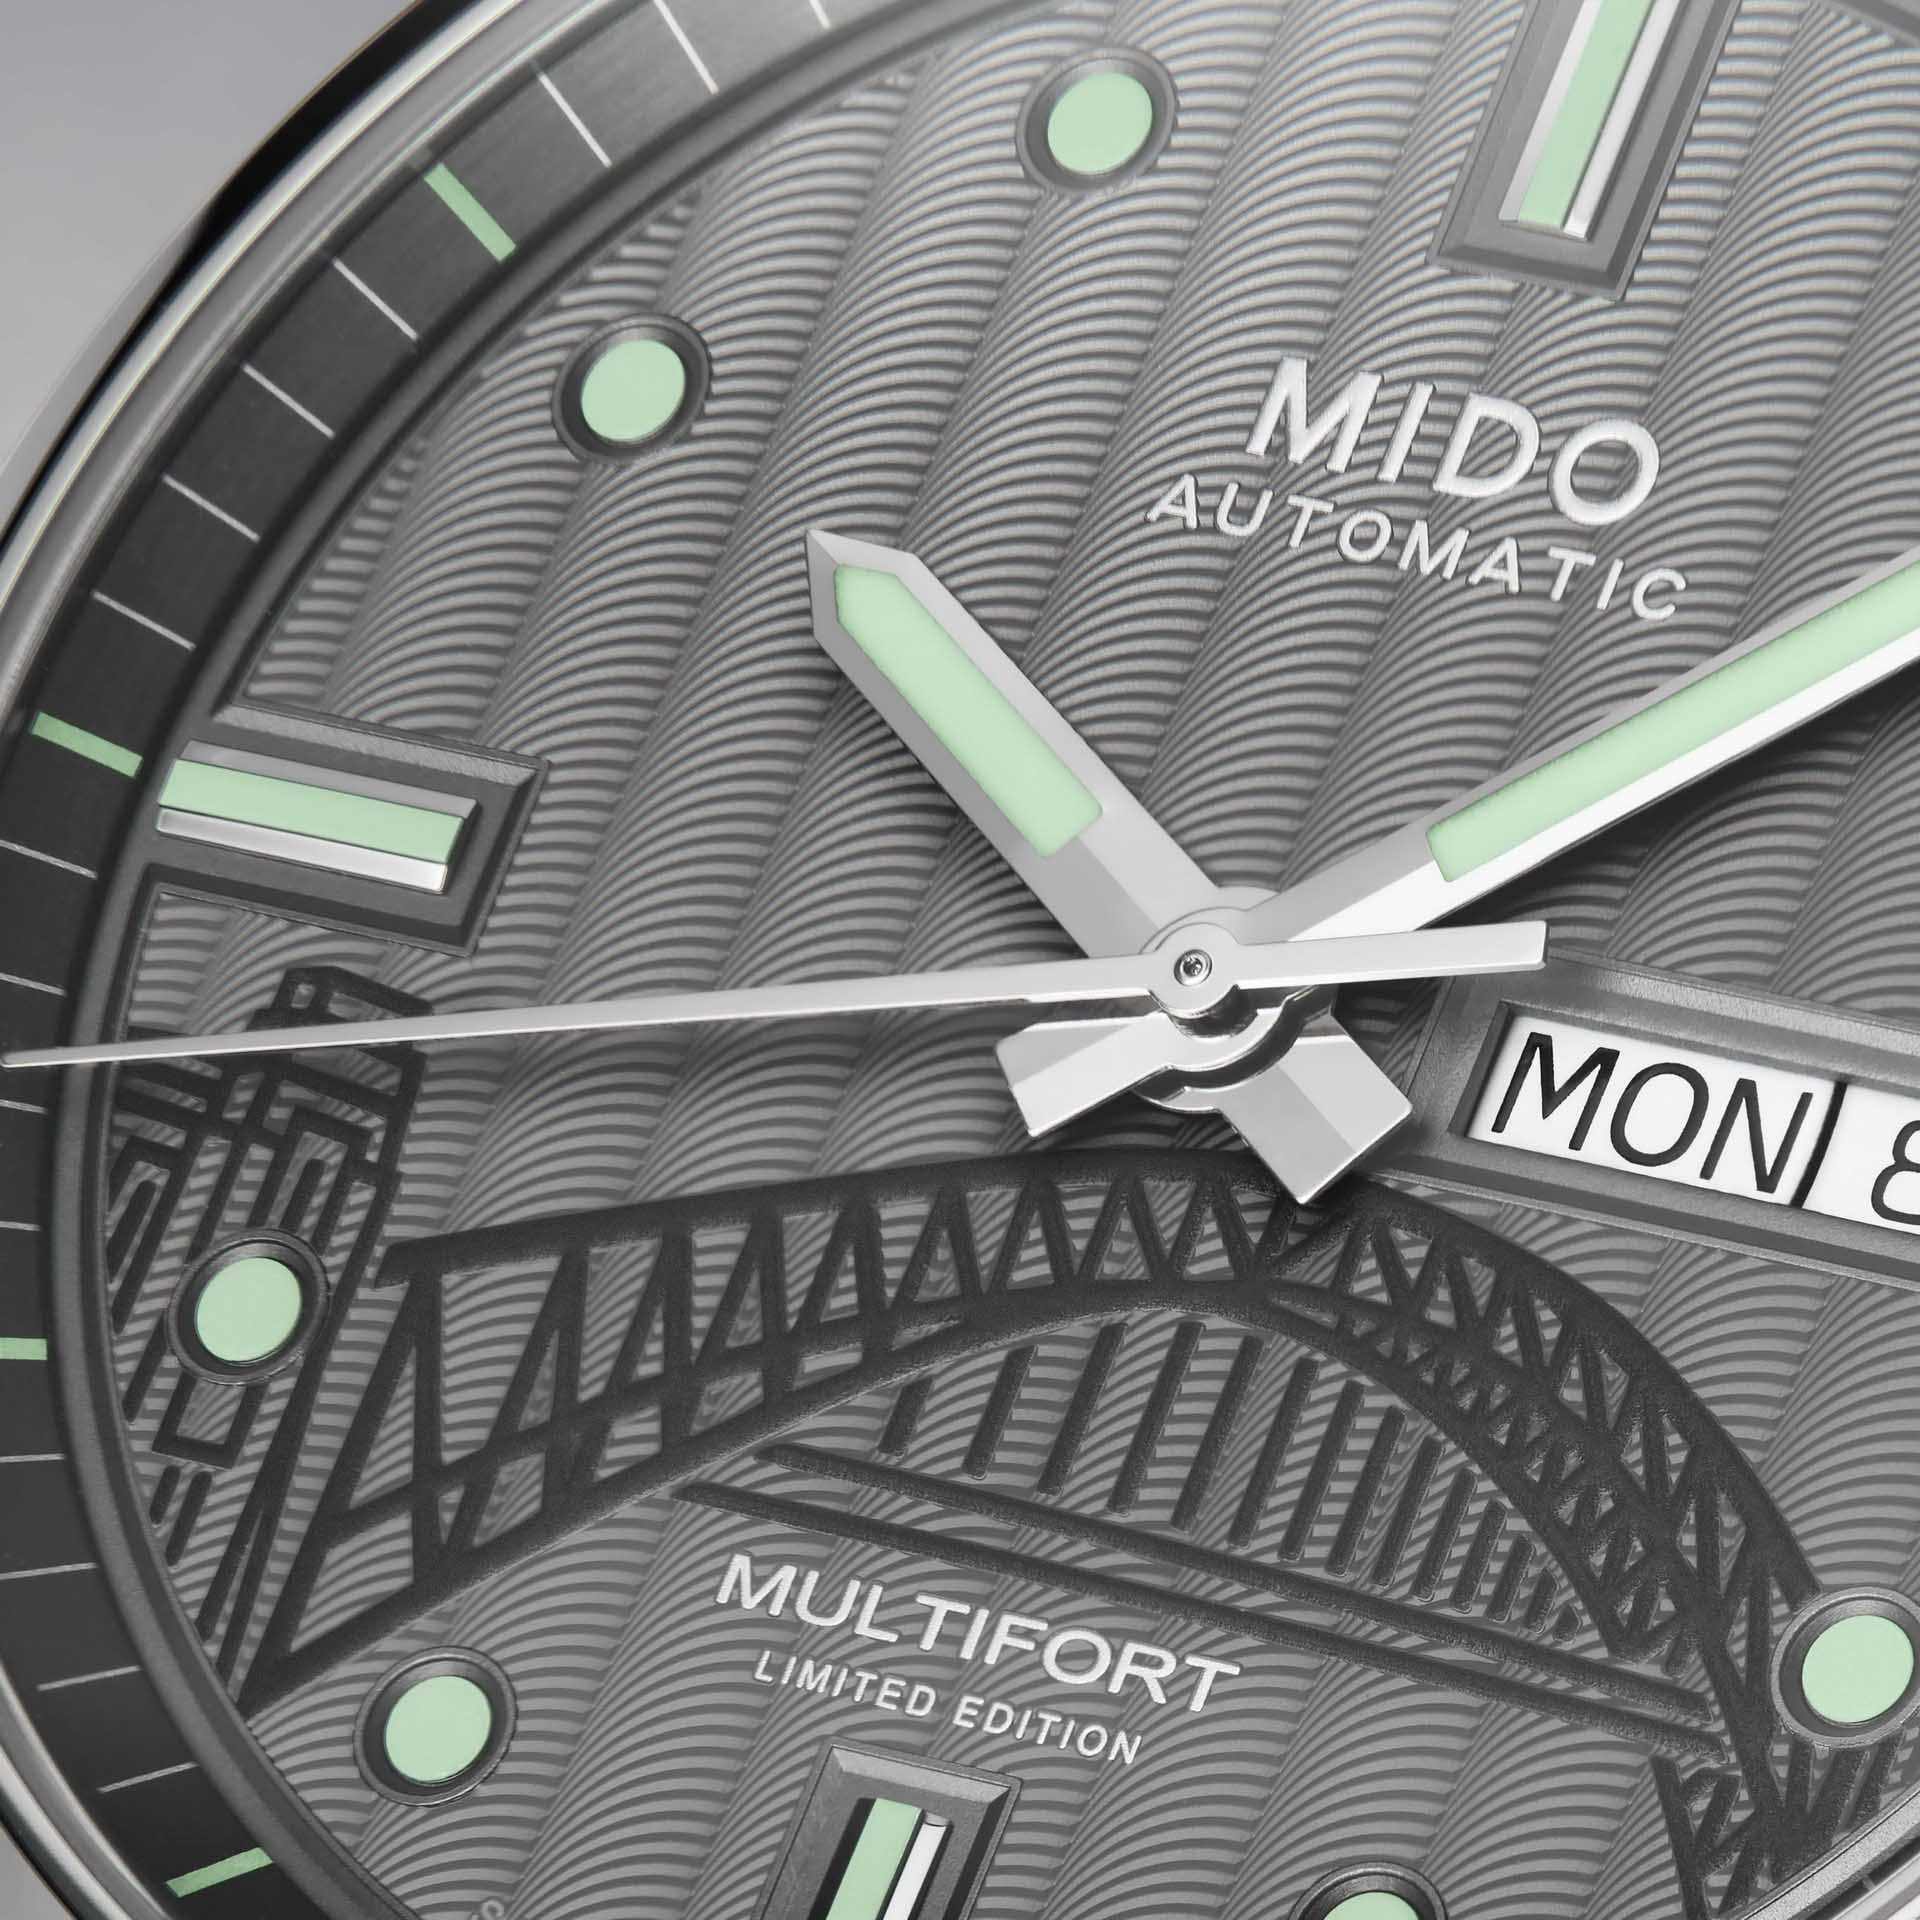 Mido Multifort 20th Anniversary Inspired by Architecture